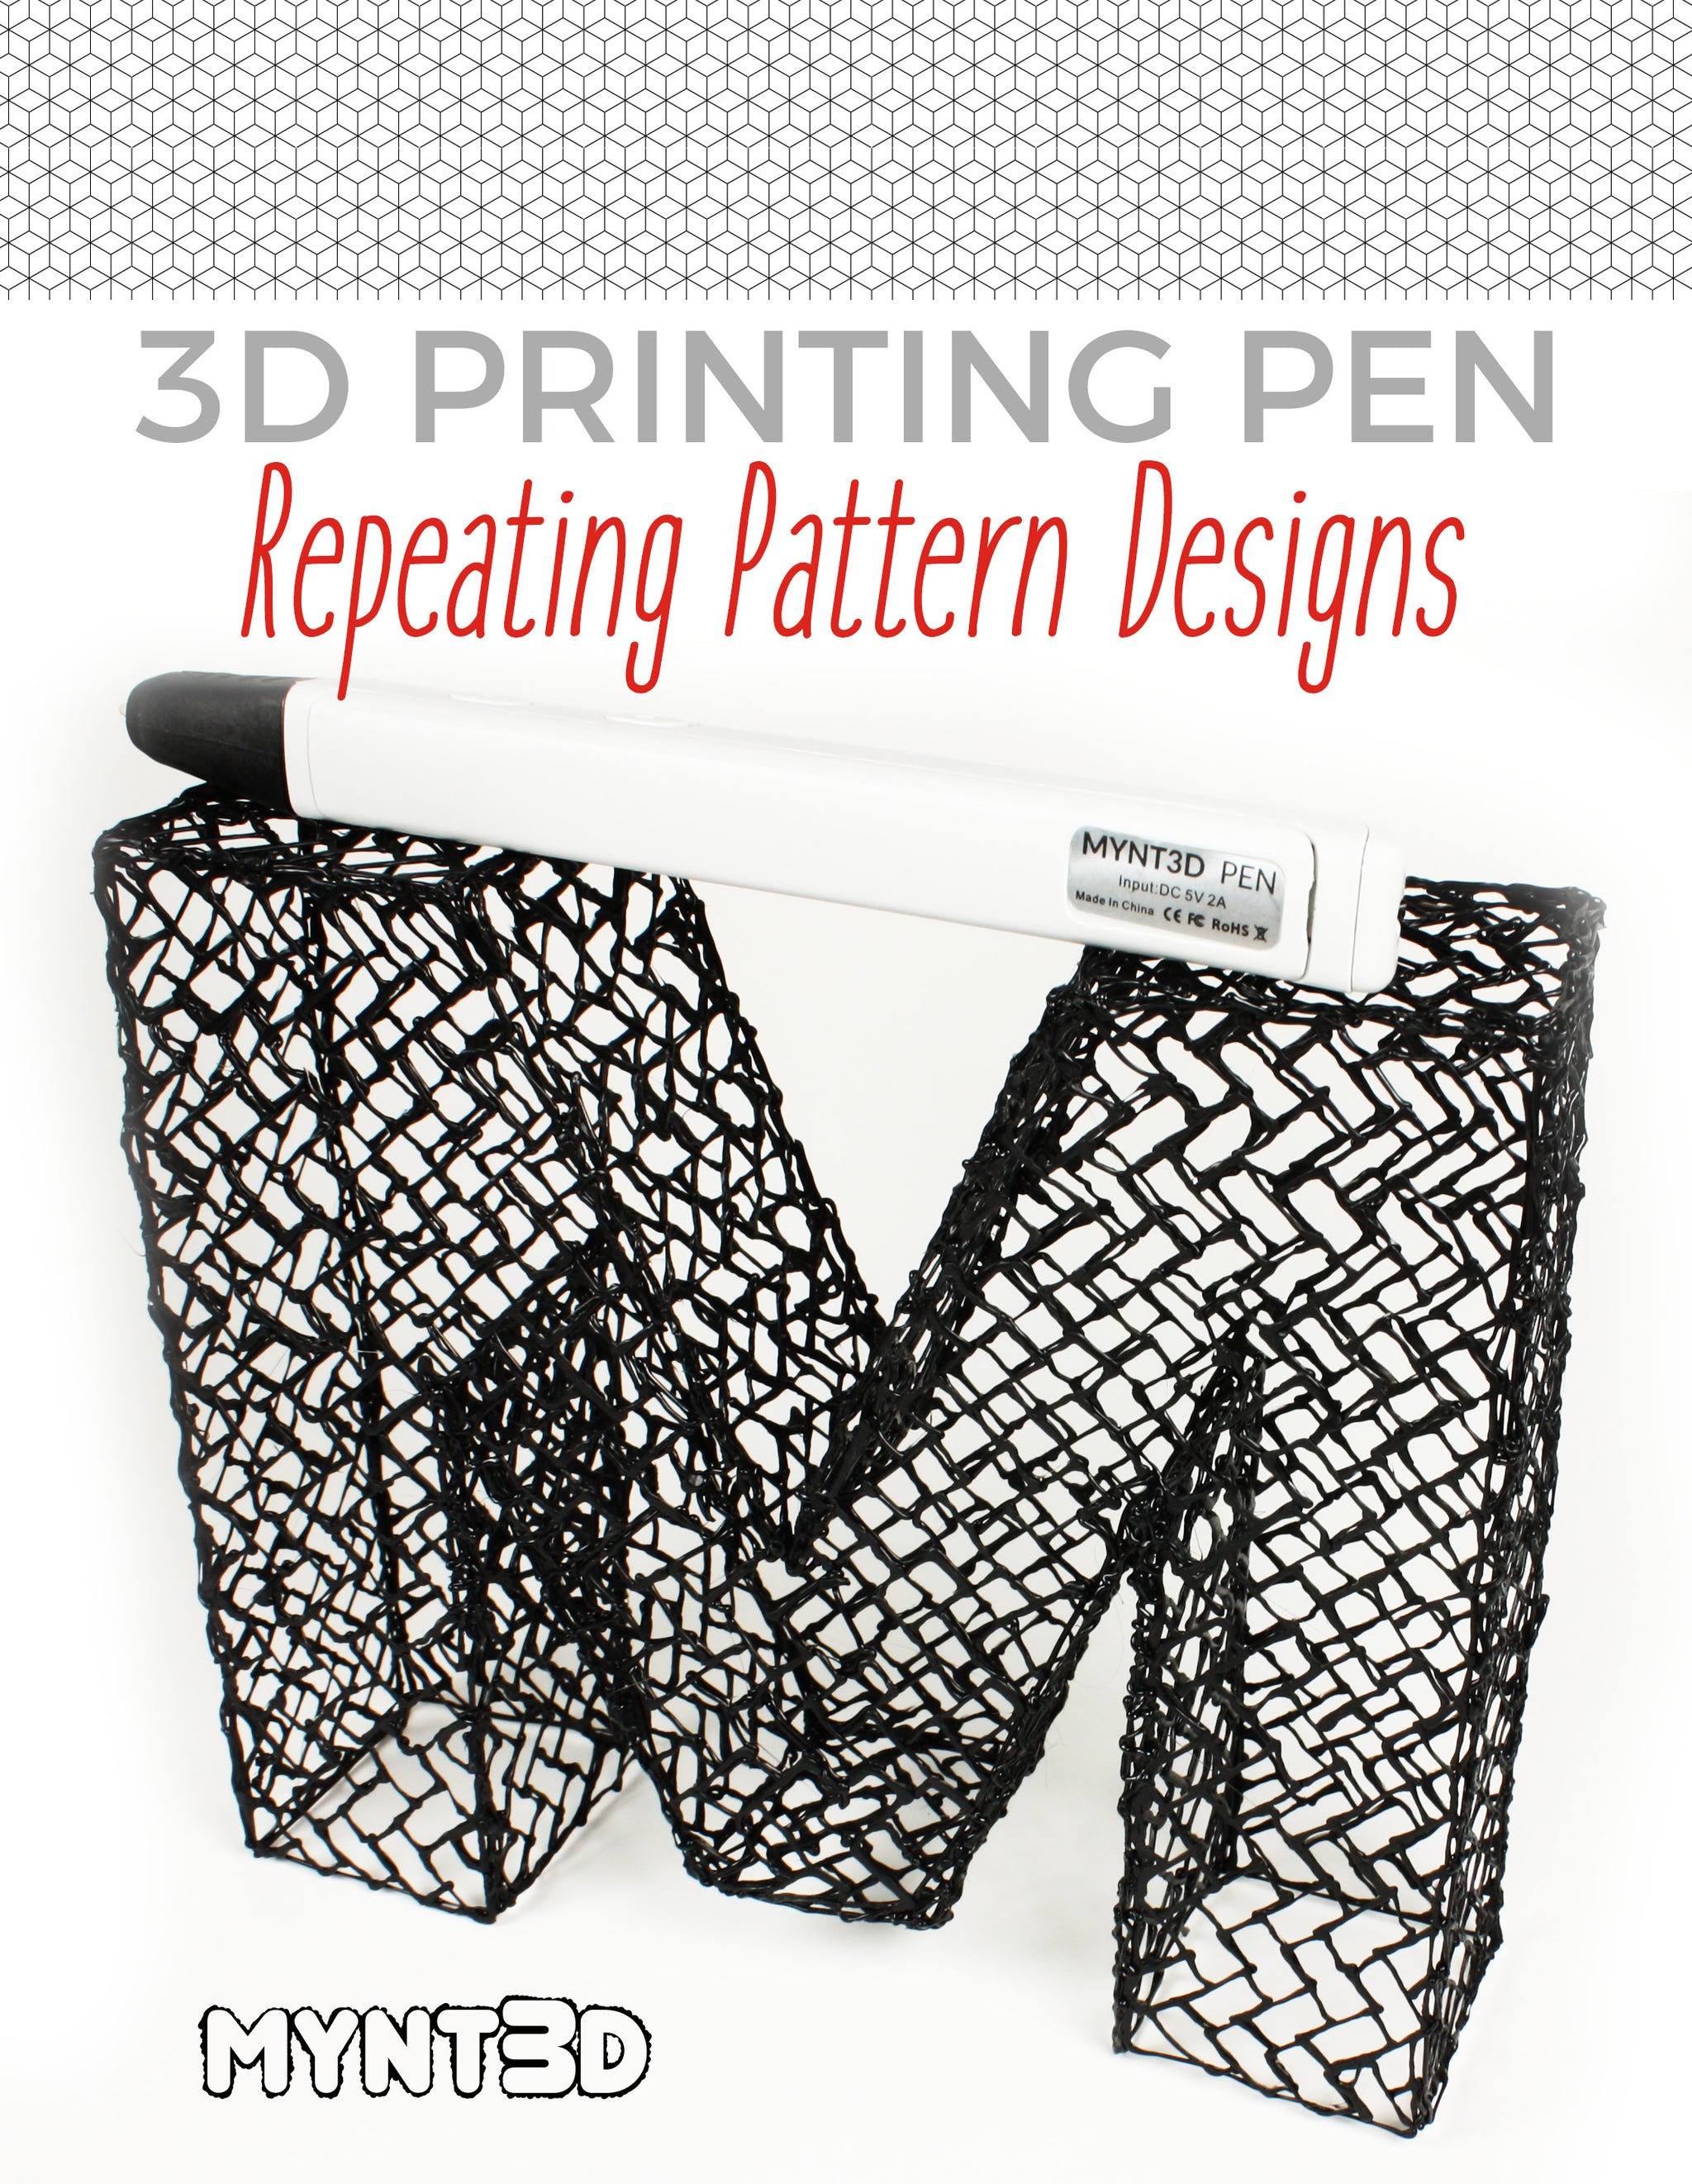 Design Patterns to Draw in 3D MYNT3D